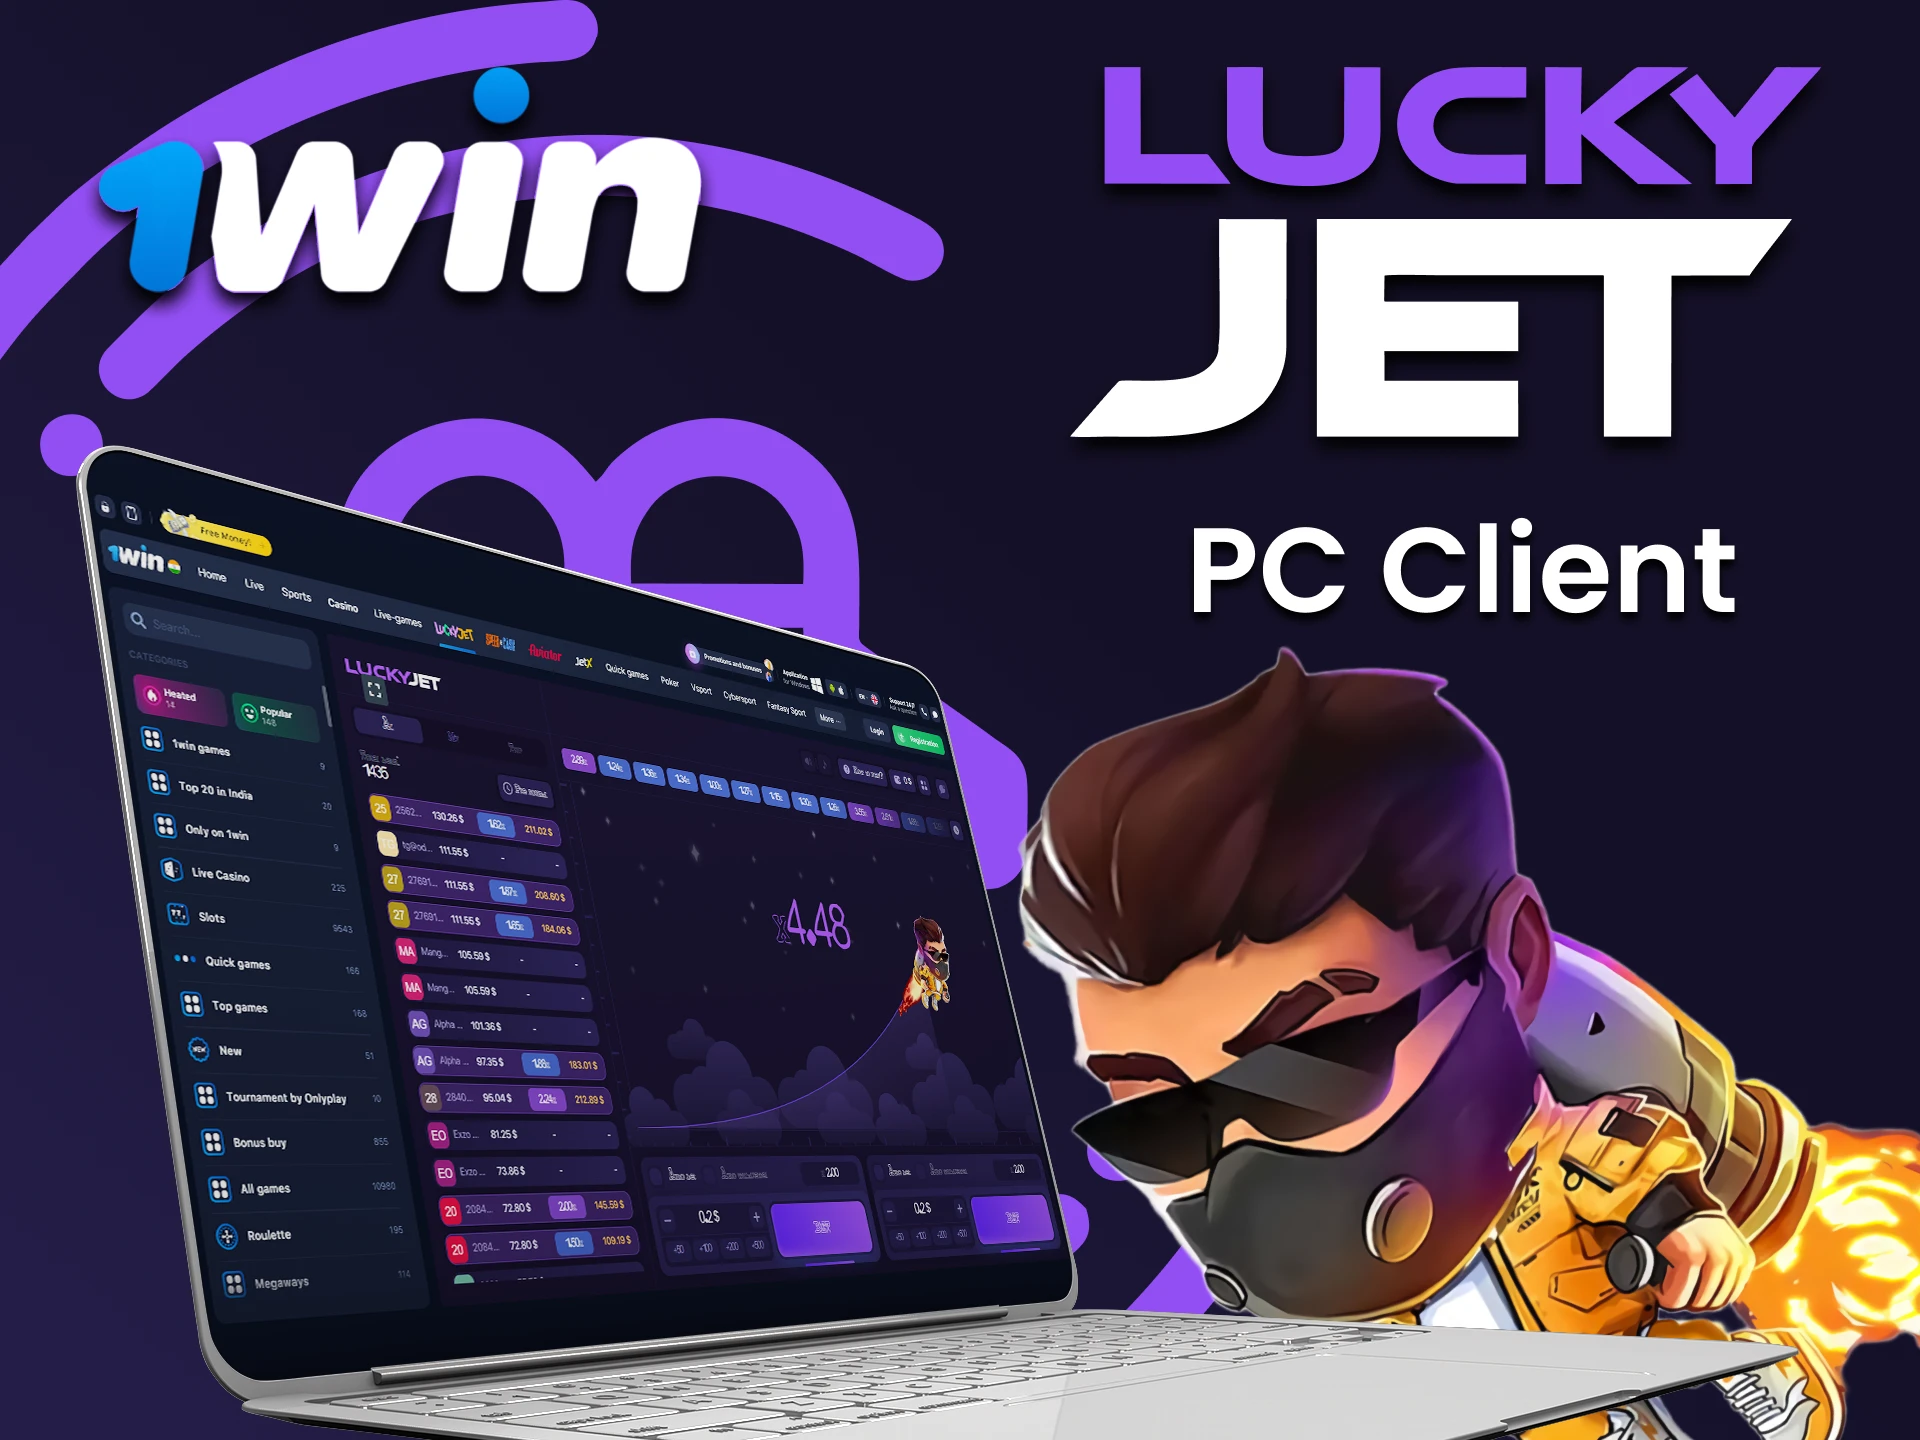 Use your PC to play Lucky Jet by 1win.